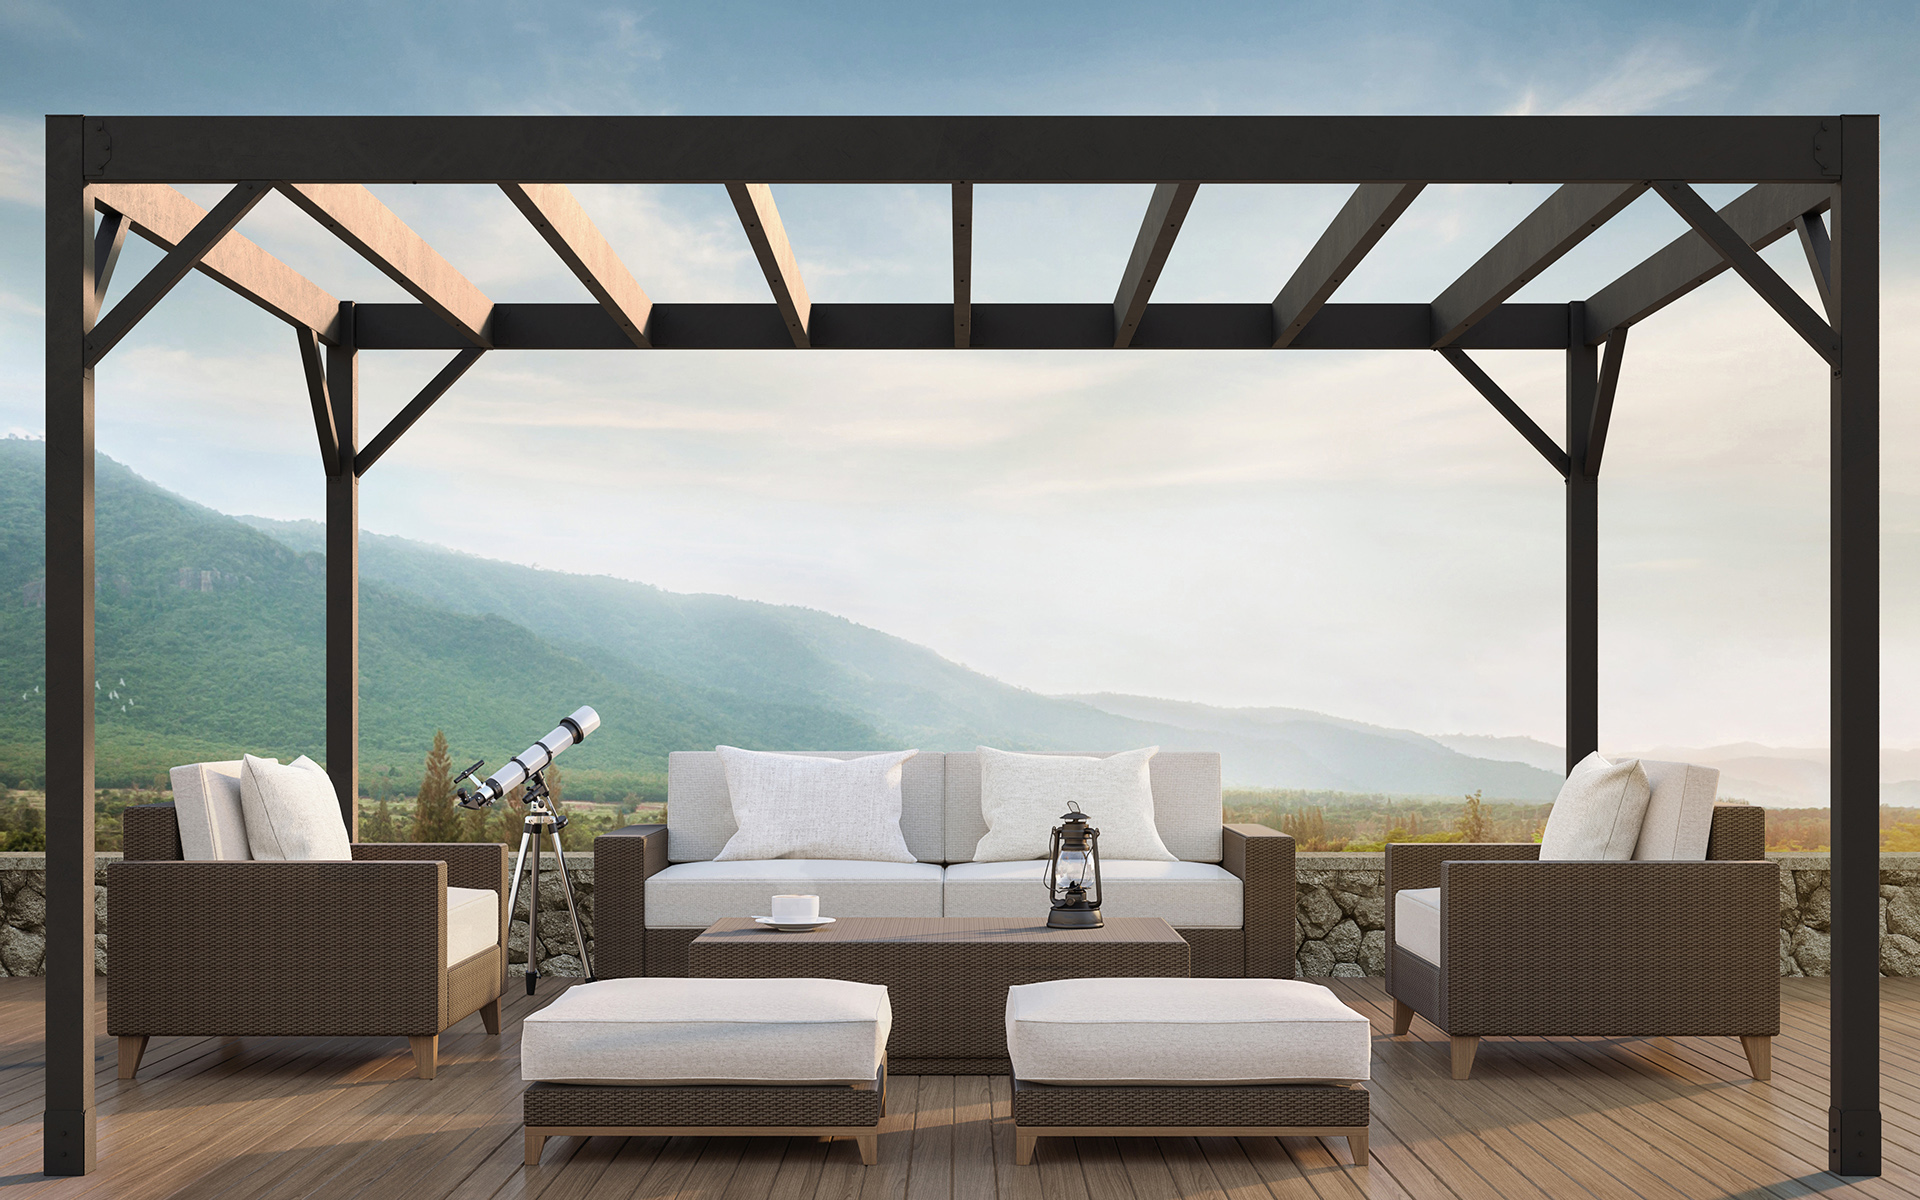 Outdoor metal pergola over couches with hazy mountains in the background.